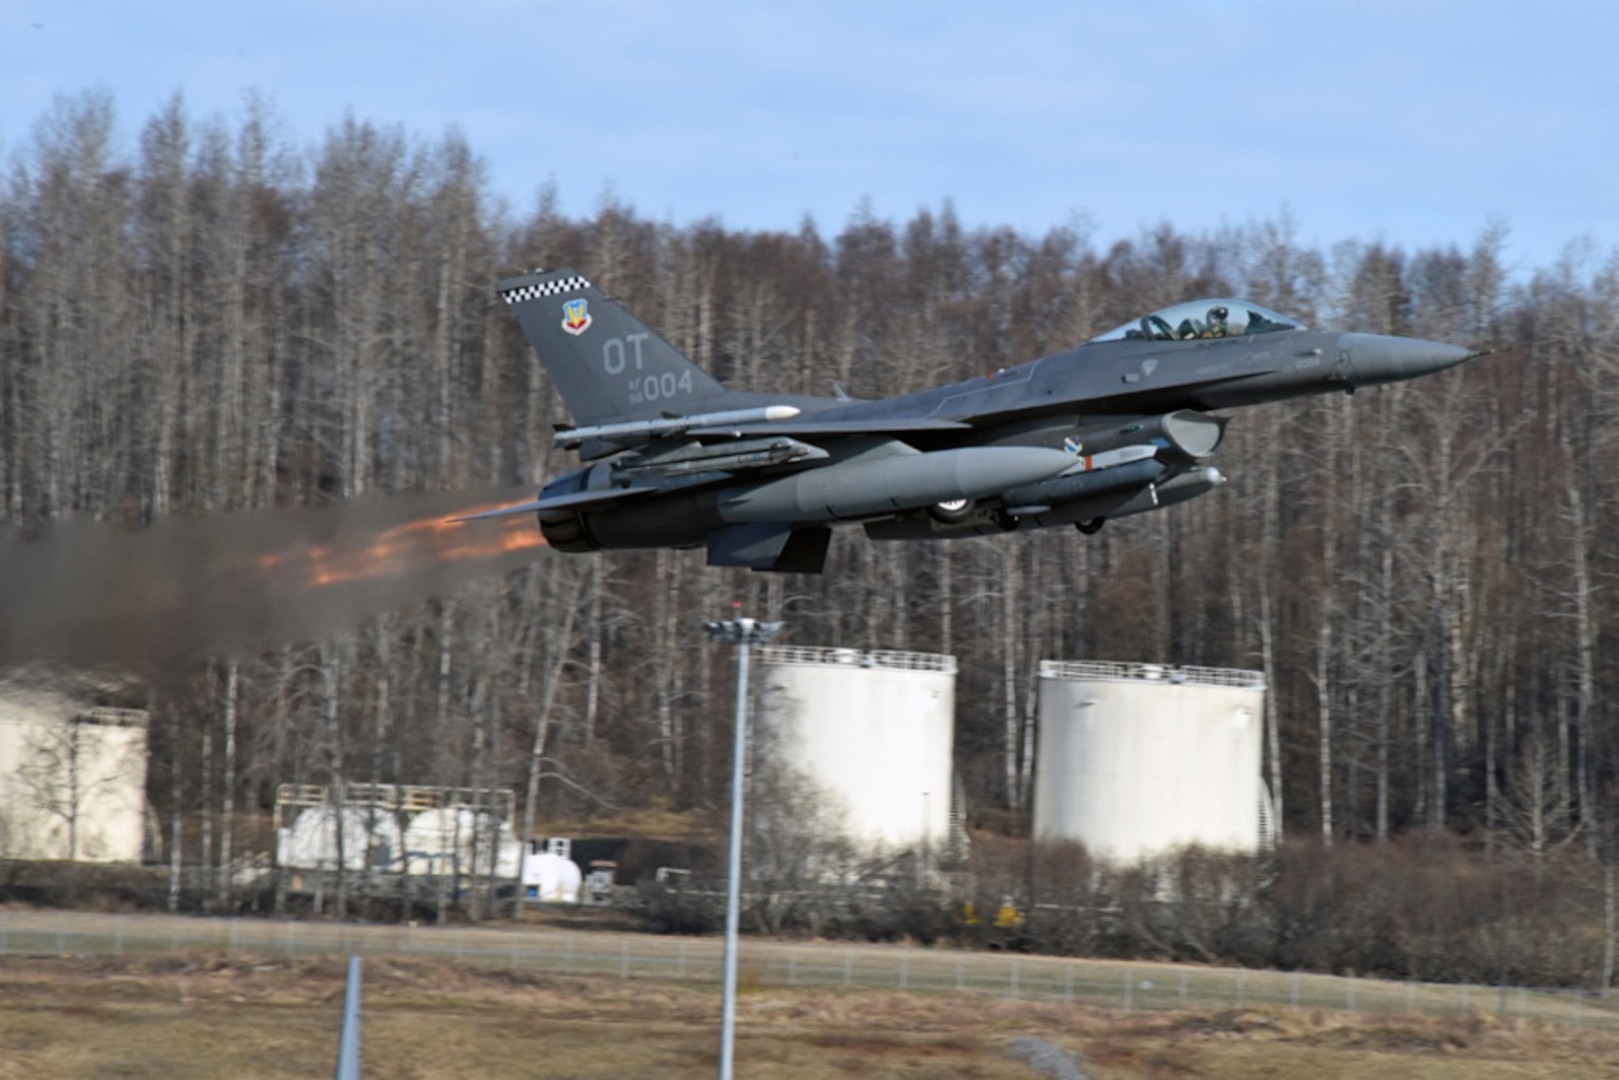 An F-16 Fighting Falcon with the 53rd Wing at Nellis Air Force Base, Nev., departs the runway at Joint Base Elmendorf-Richardson, Alaska, May 2 during Exercise Northern Edge 2017. Northern Edge is Alaska’s largest and premier joint training exercise designed to practice operations, techniques and procedures as well as enhance interoperability among the services. Thousands of participants from all the services Airmen, Soldiers, Sailors, Marines and Coast Guard personnel from active duty, Reserve and National Guard units are involved.